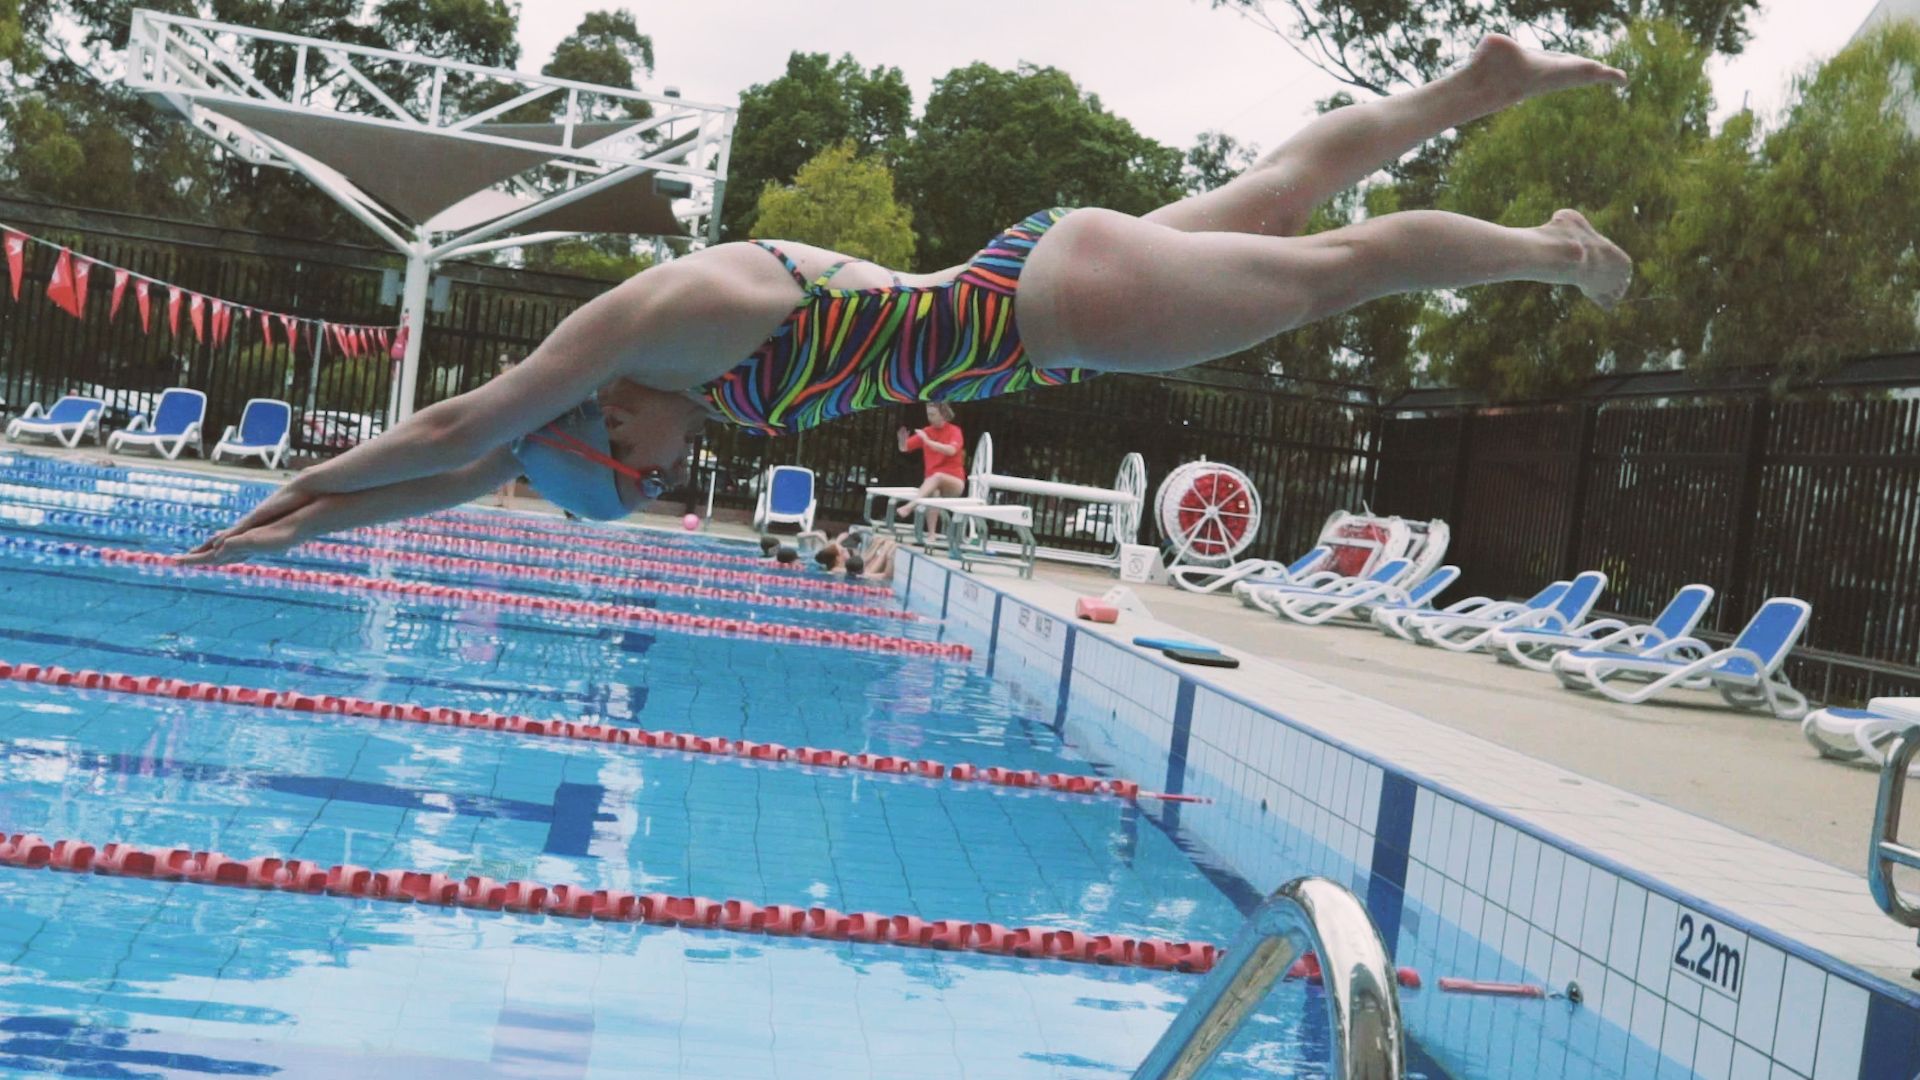 Female student dives into a pool at the open air Hawthorn Aquatic Centre